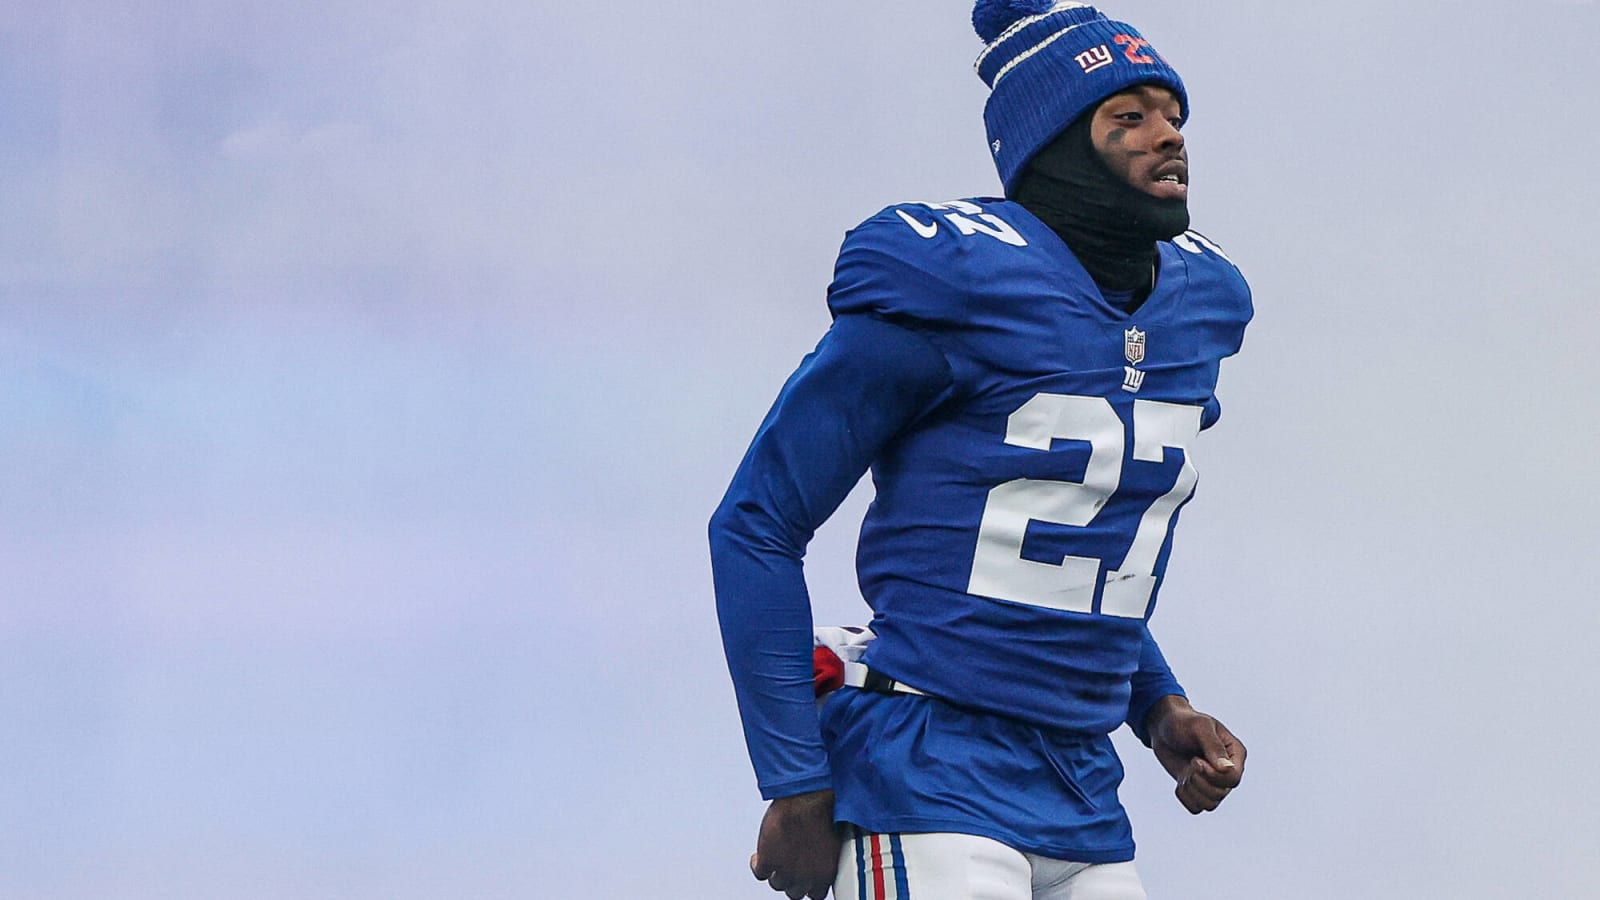 Has Giants standout safety Jason Pinnock ‘locked down’ a starting job at training camp?